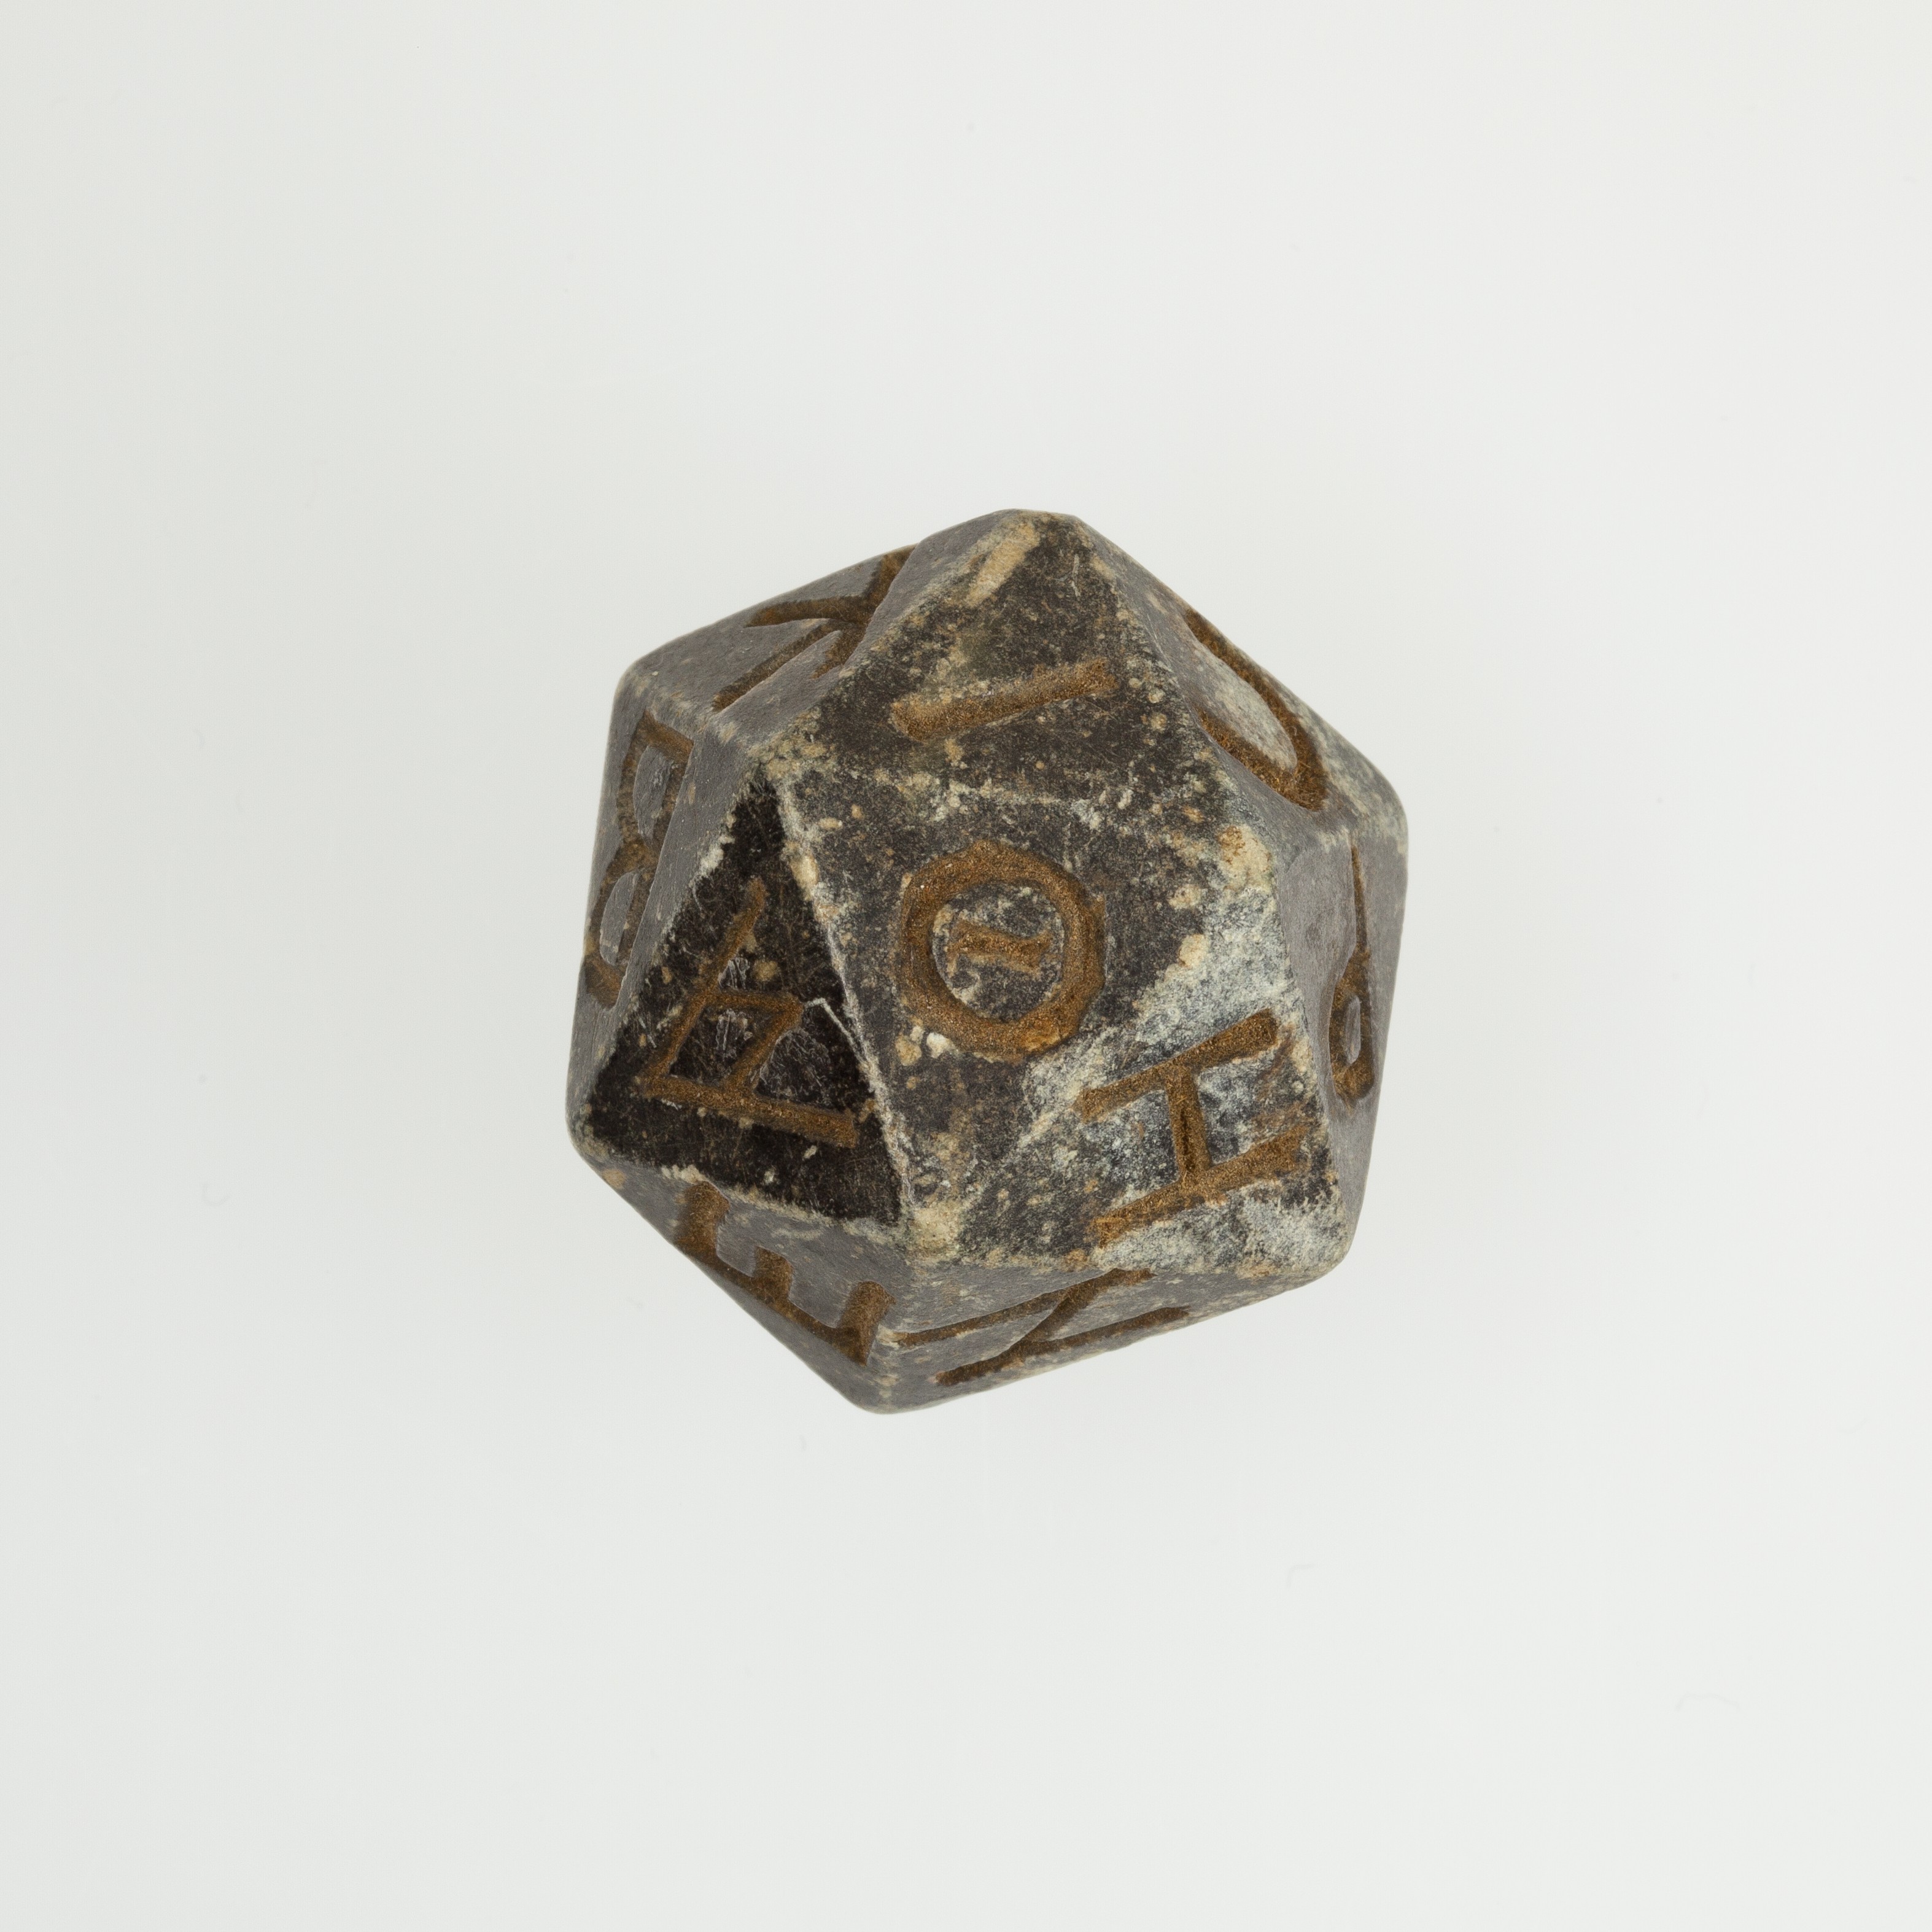 Twenty-sided die (icosahedron) with faces inscribed with Greek